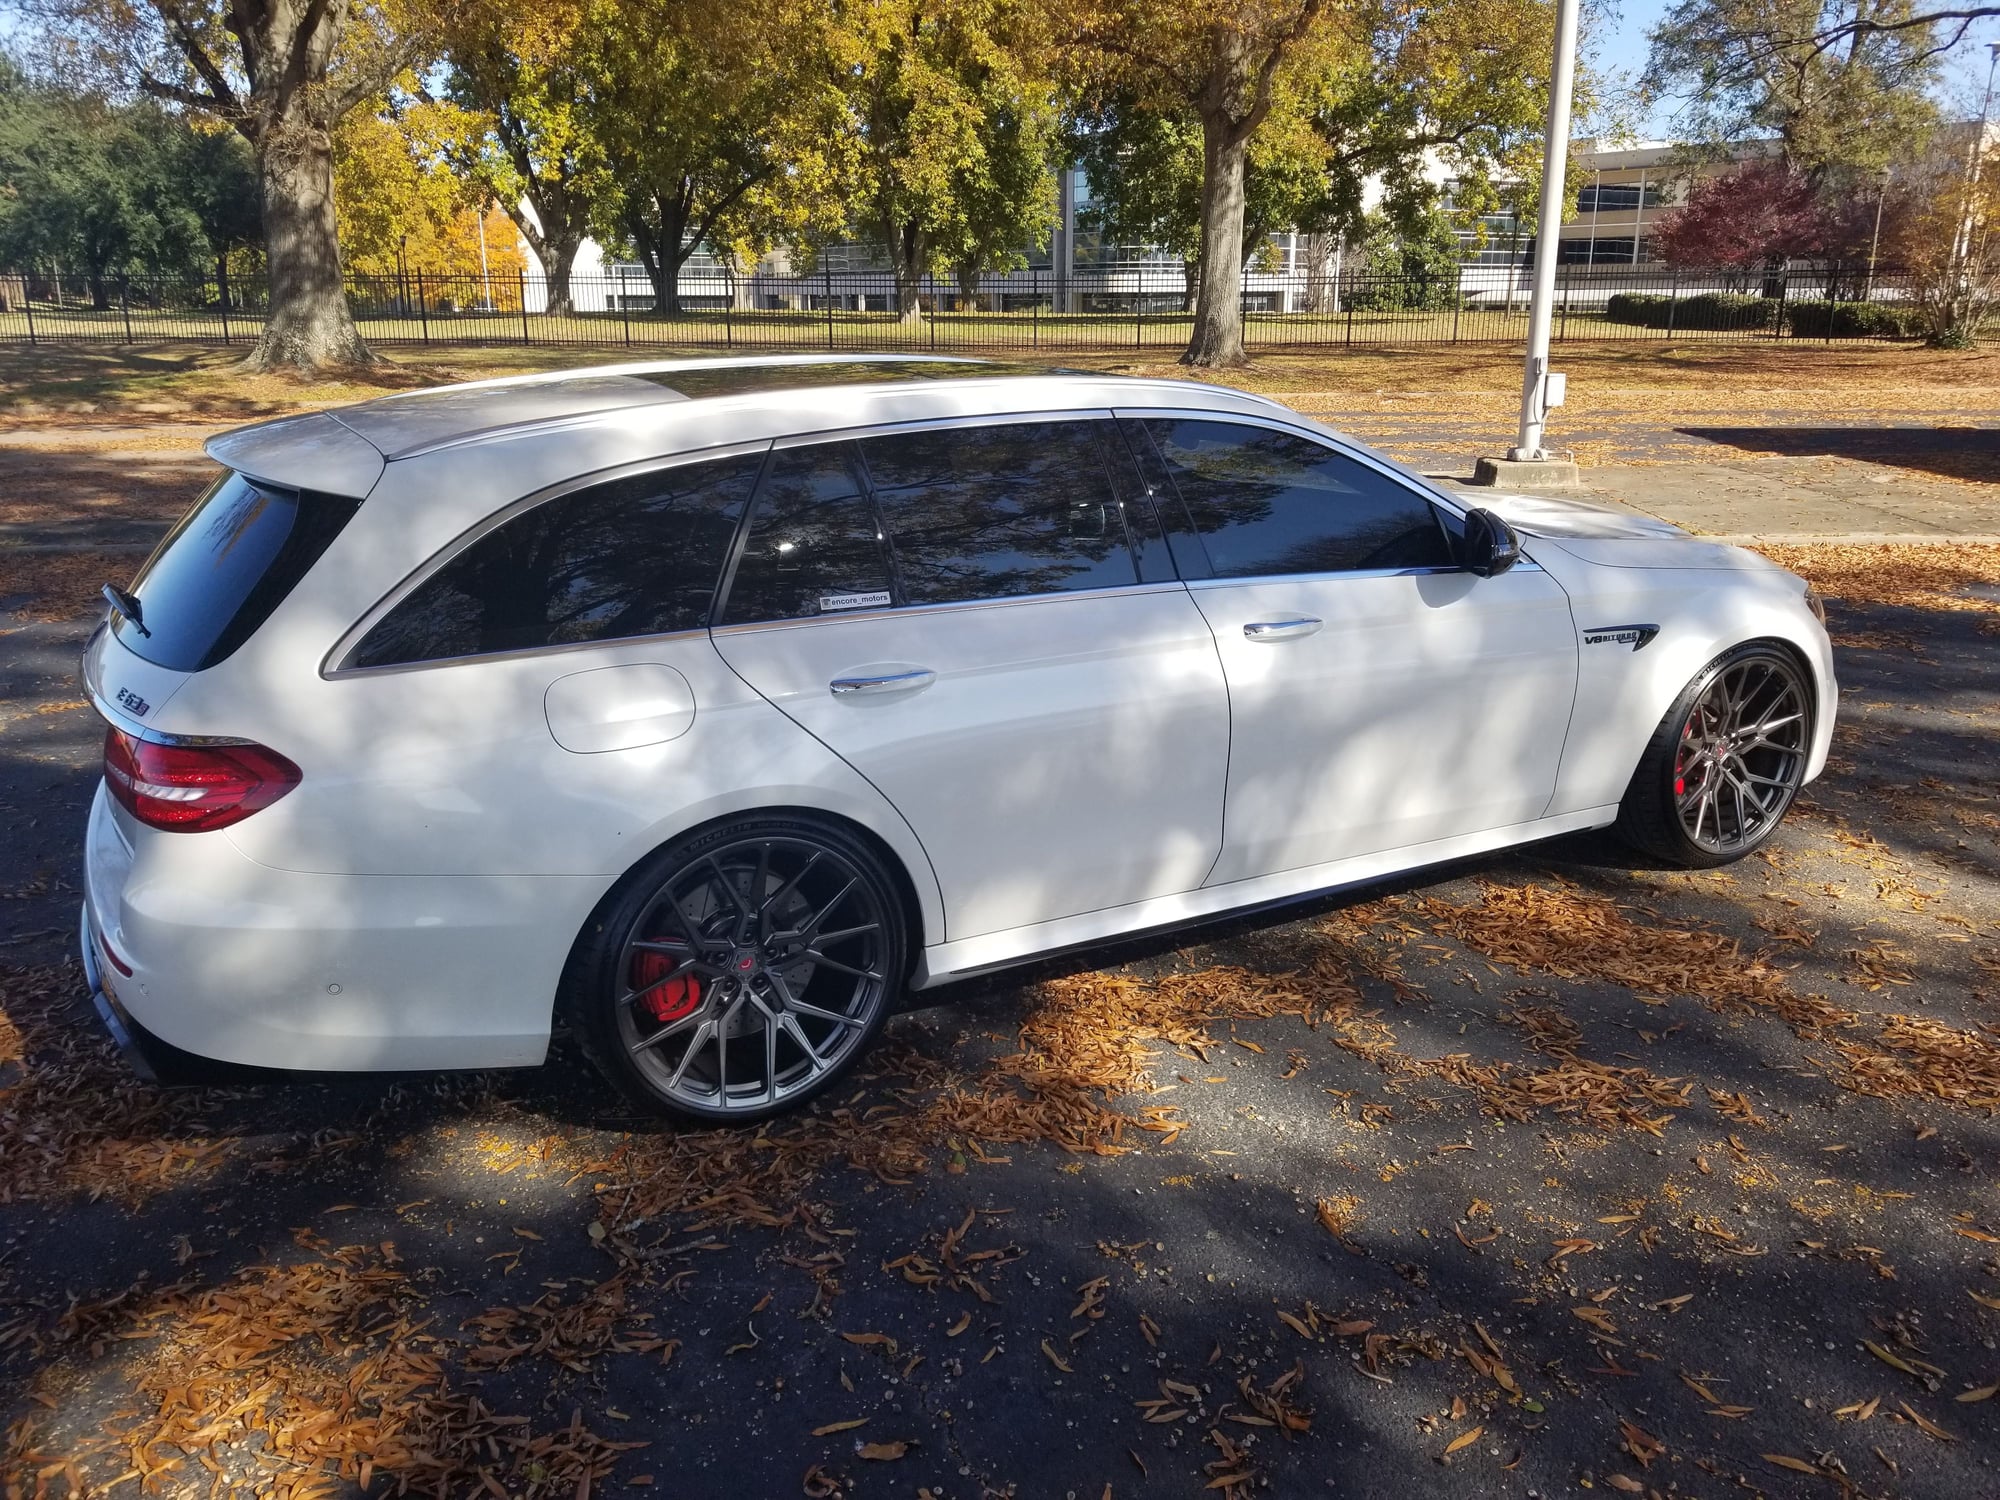 2018 Mercedes-Benz E63 AMG S - Renntech, 21" Vossen,  and more, 2018 E63S wagon, right colors and condition - Used - VIN WDDZH8KB4JA328391 - 12,900 Miles - 8 cyl - AWD - Automatic - Wagon - White - Macon, GA 31204, United States